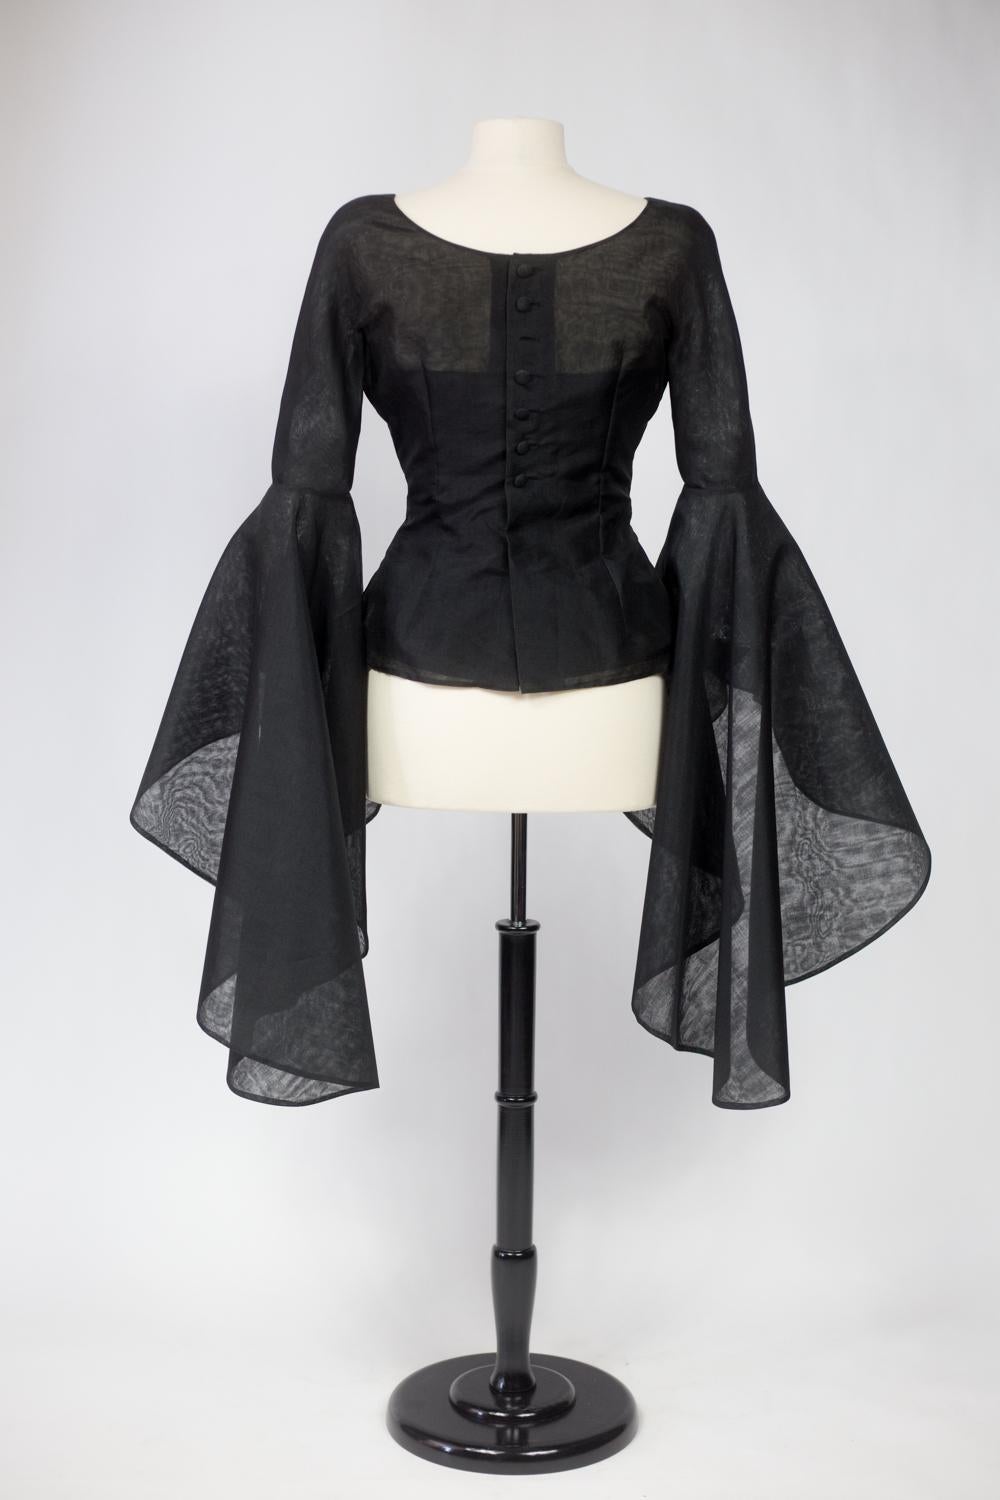 A Pierre Cardin Organza Blouse With Dramatic Batwing Sleeves Circa 1970/1980 For Sale 1